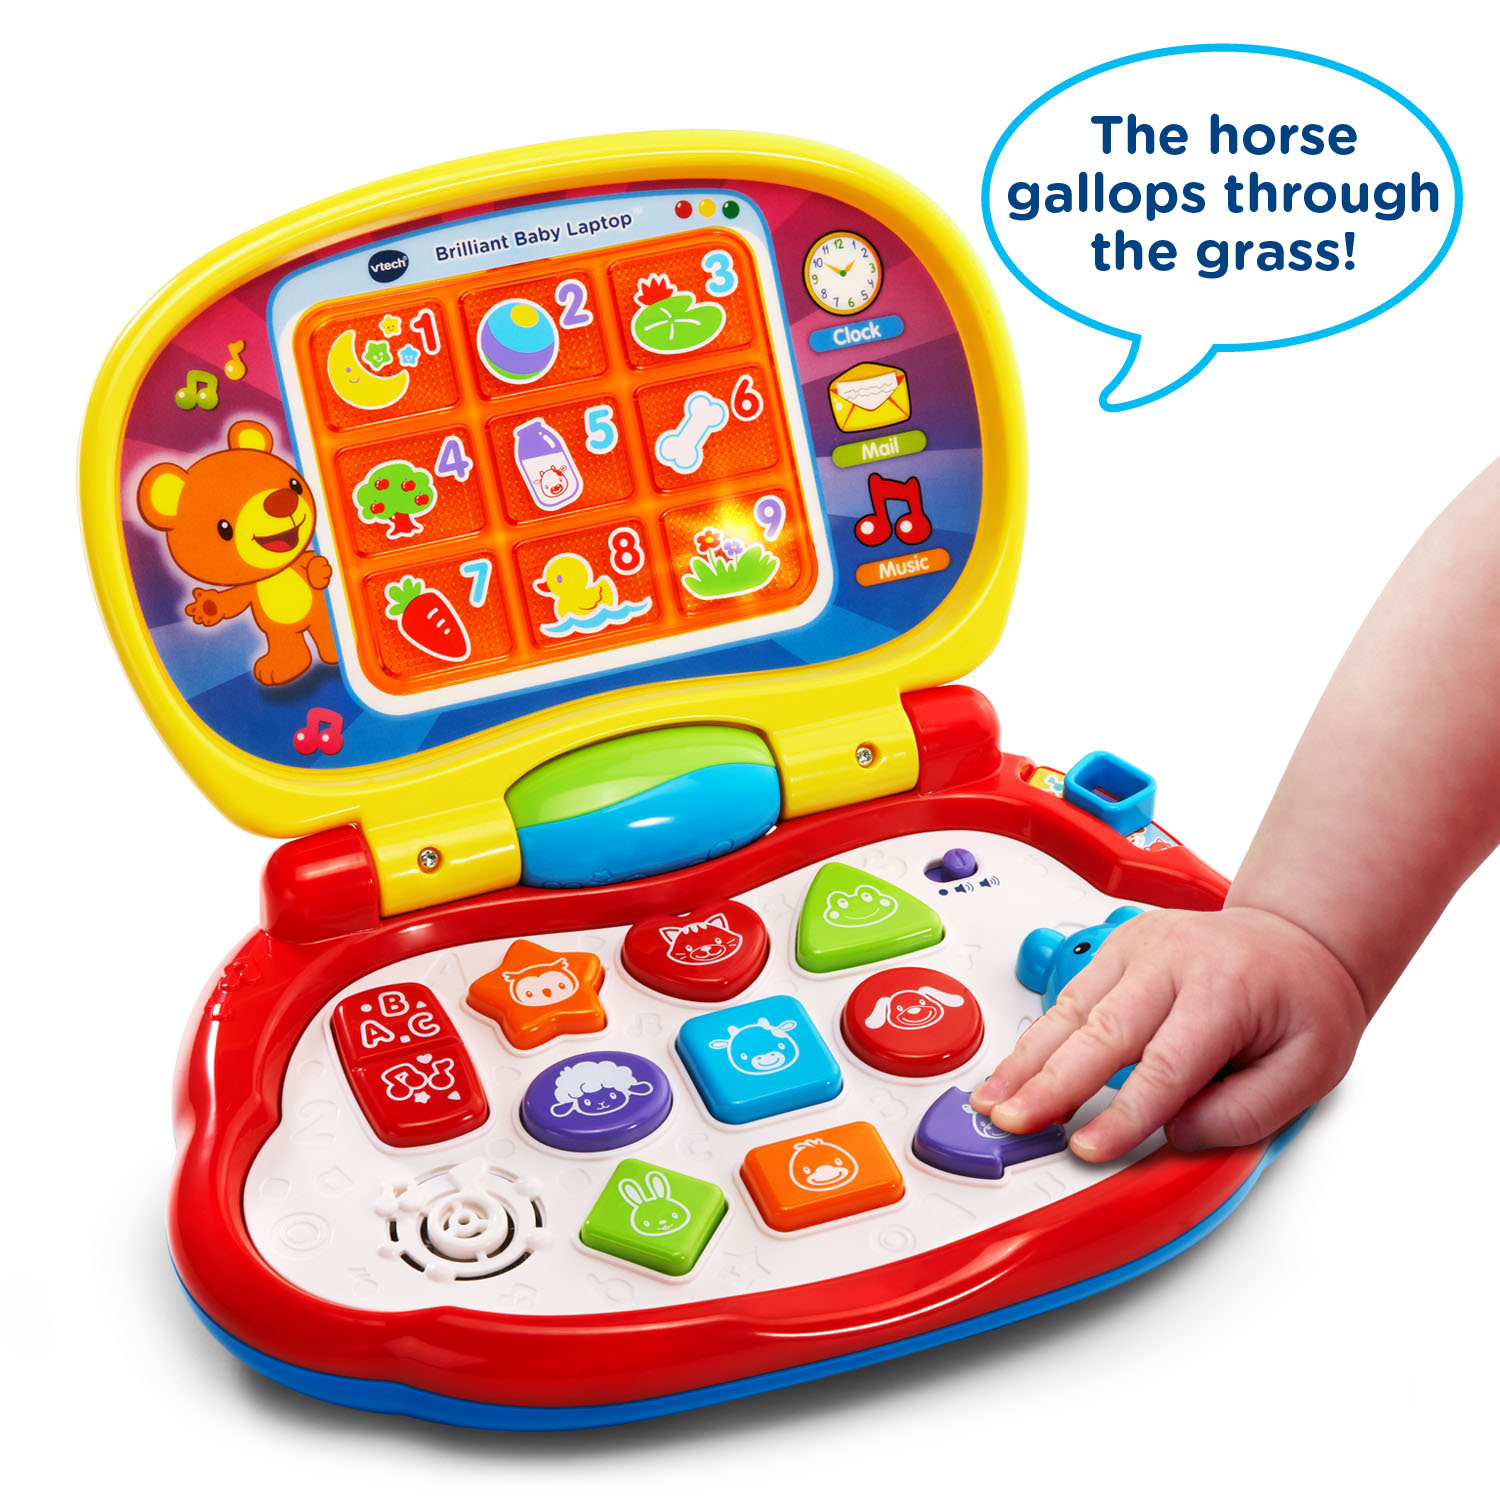 VTech Brilliant Baby Laptop Teaches Colors, Shapes, Animals and Music - image 4 of 7